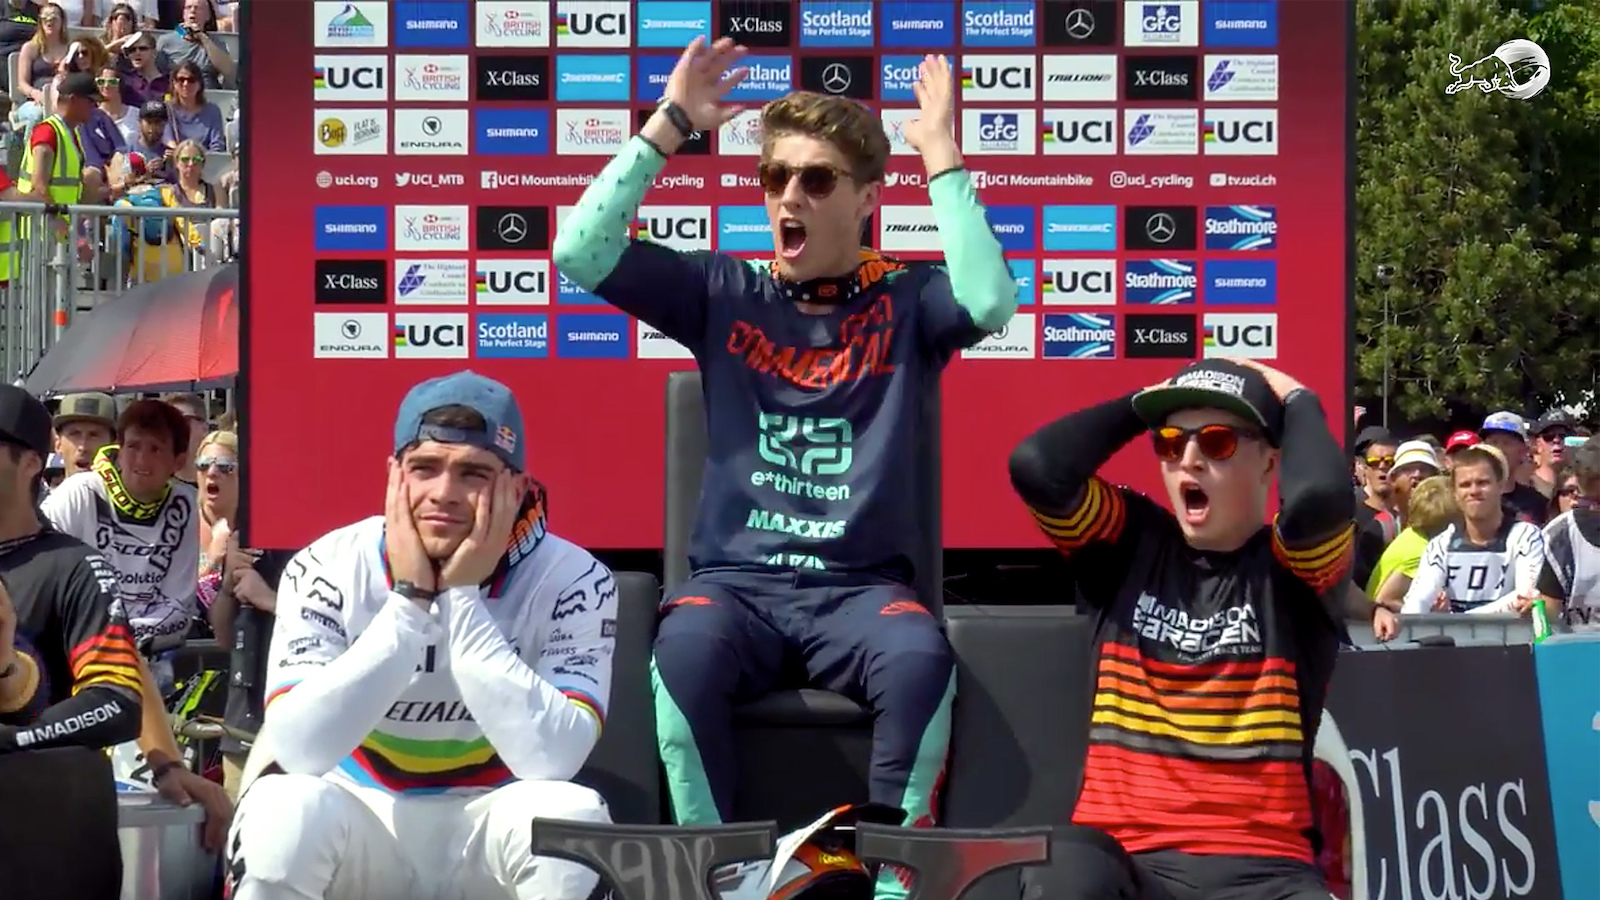 Screenshot of the podium scene at the moment Gwin crashes in the woods.